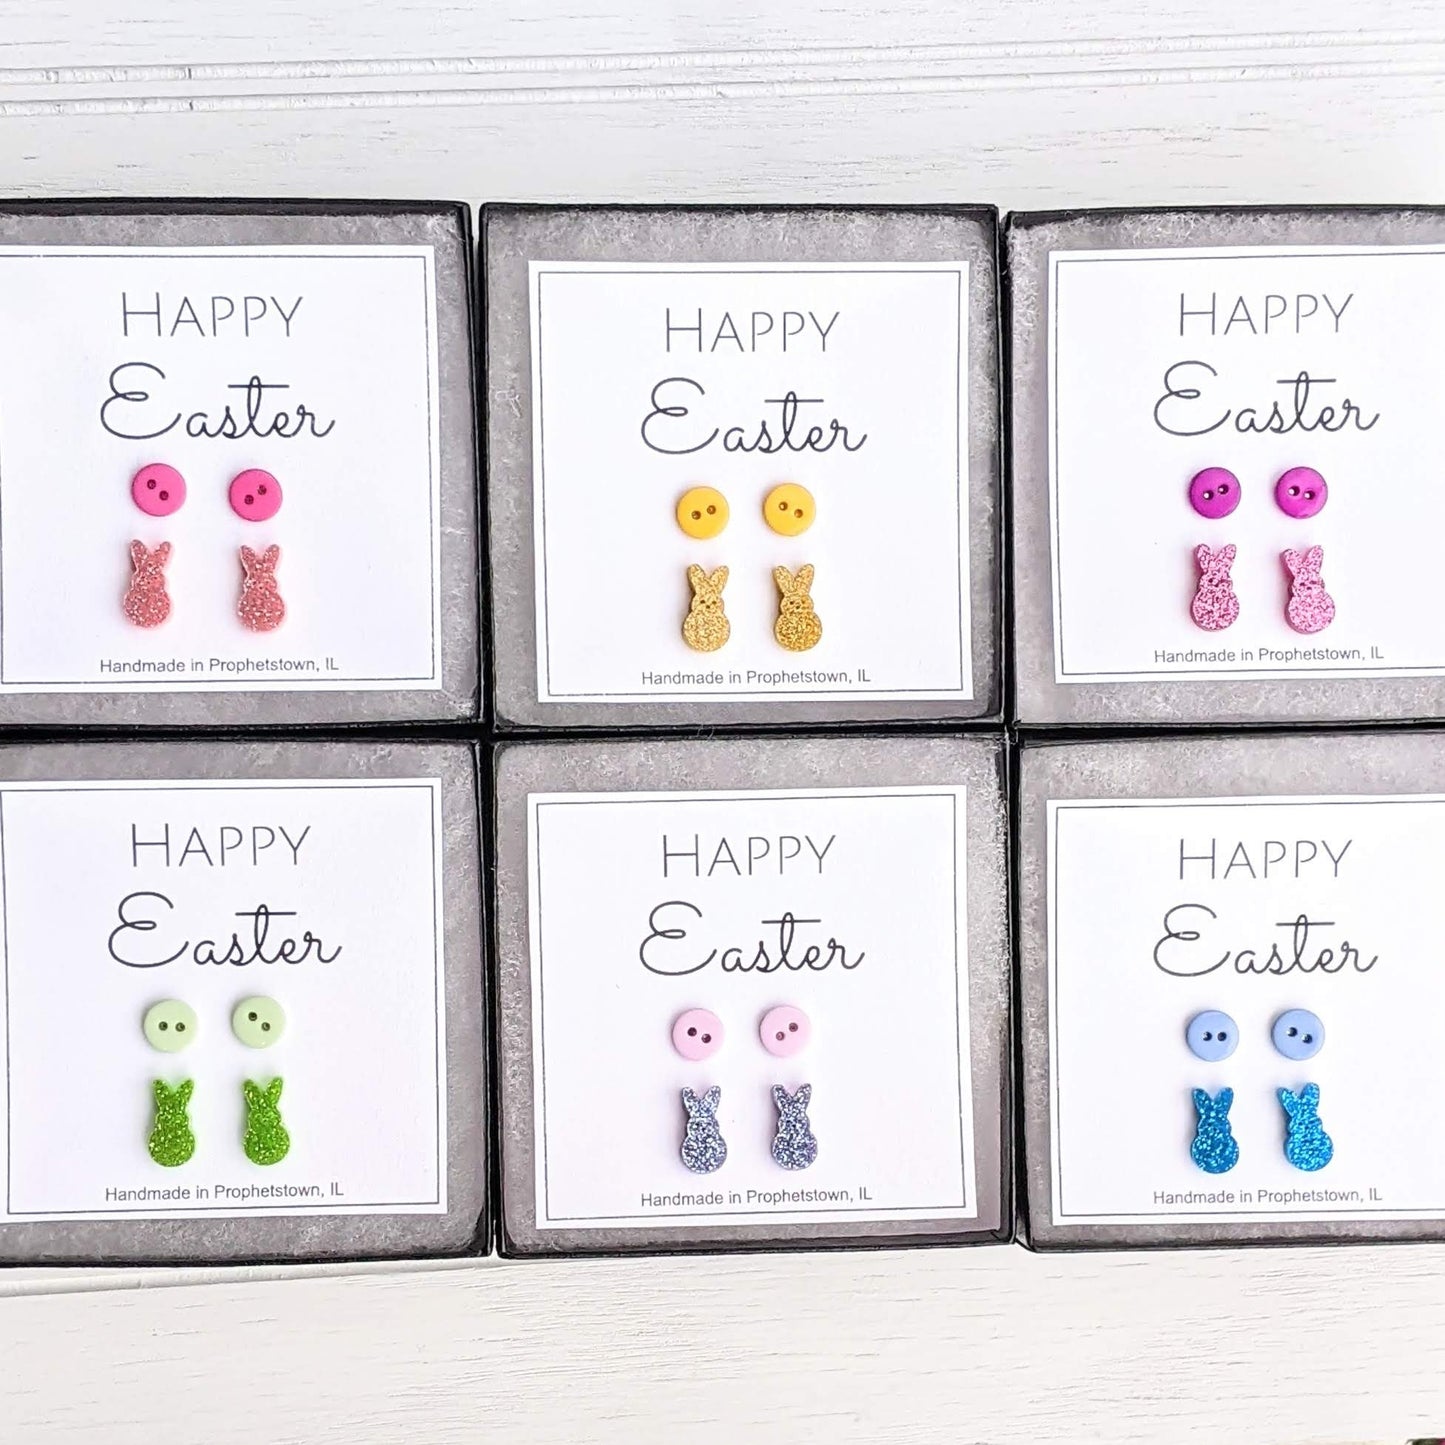 Happy Easter Bunny and Ladybug Earrings Boxed Sets